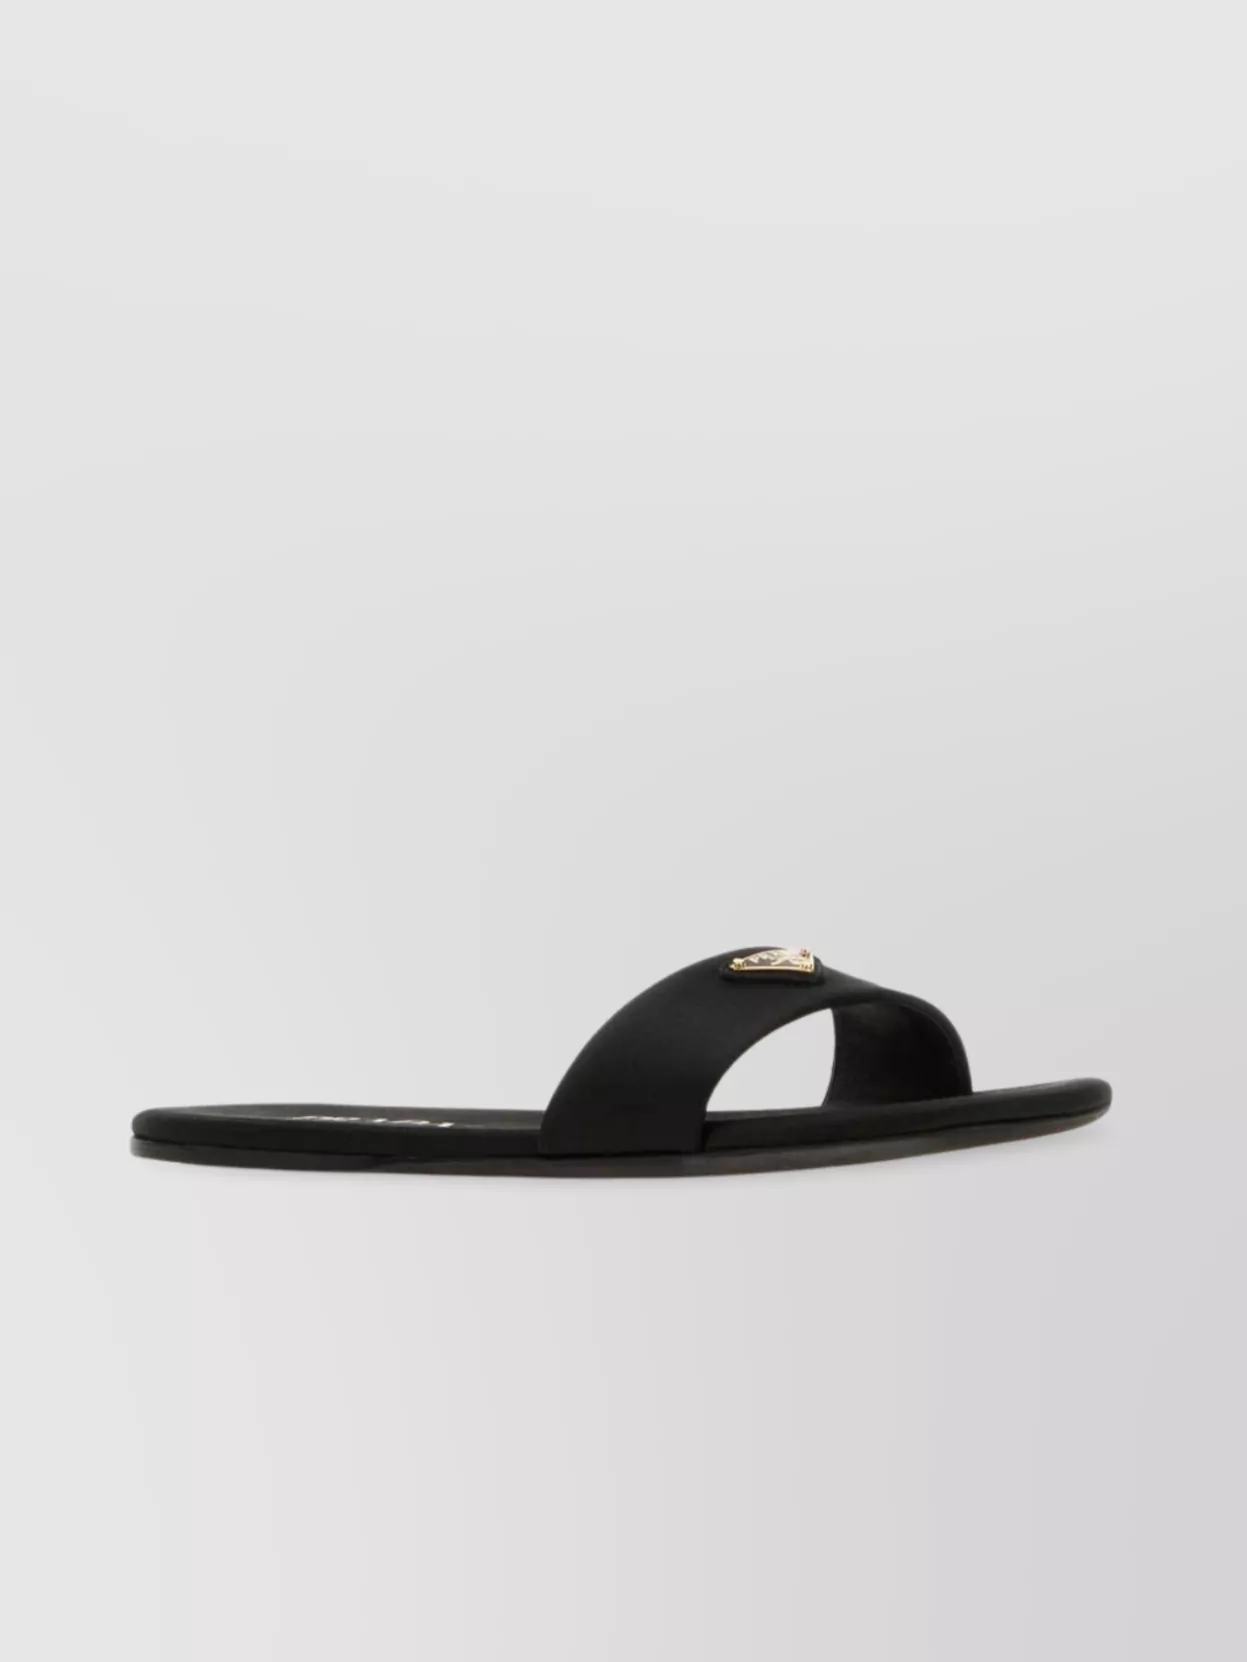 Prada Satin Slides With Flat Sole And Open Toe In Black